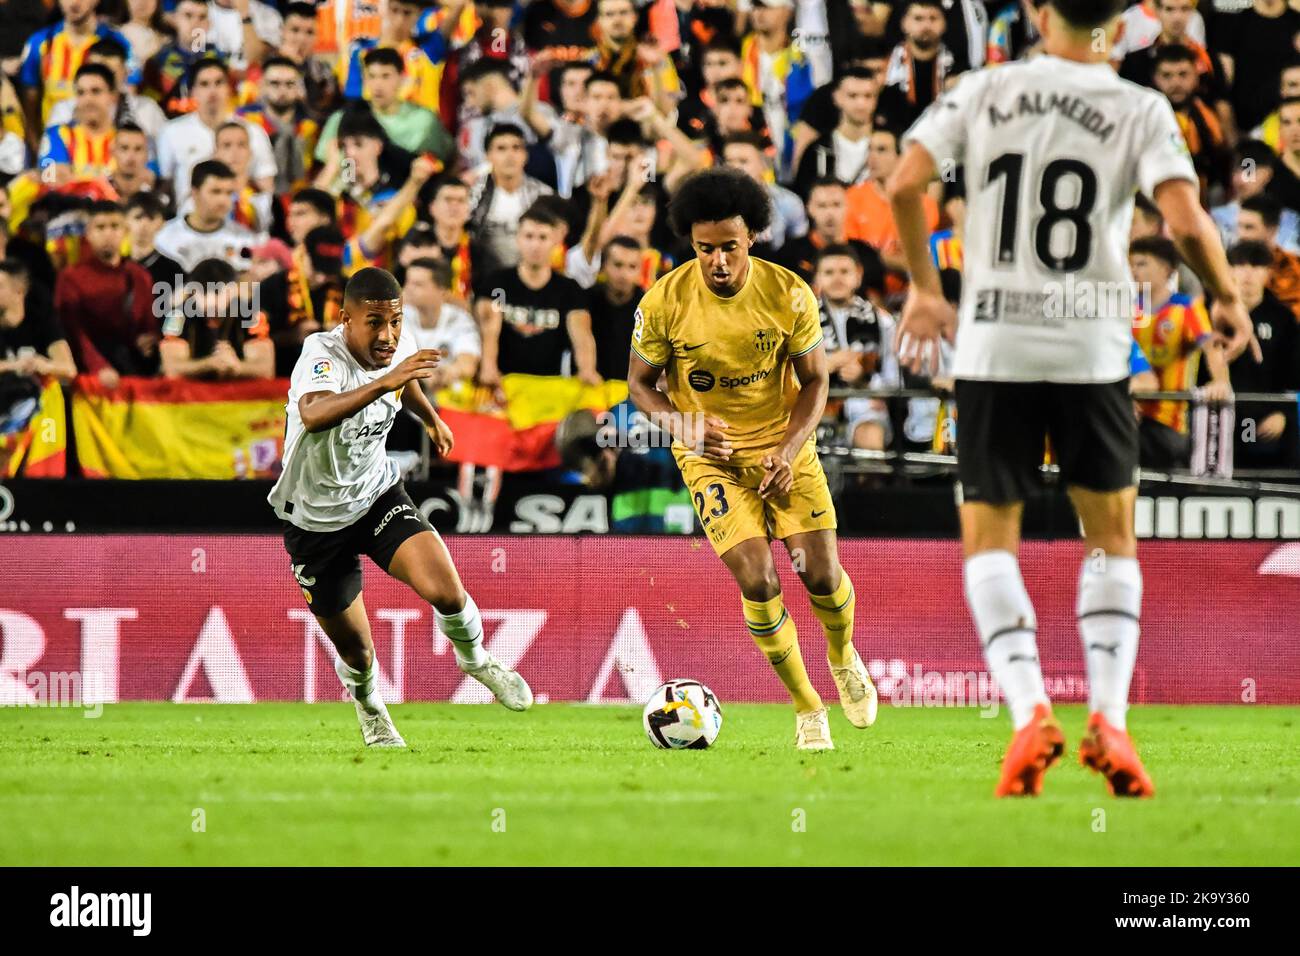 VALENCIA, SPAIN - OCTOBR  29: Jules Koundé of FC Barcelona during the match between Valencia CF and FC Barcelona of La Liga Santander on October 29, 2022 at Mestalla in Valencia, Spain. (Photo by Samuel Carreño/ PX Images) Credit: Px Images/Alamy Live News Stock Photo